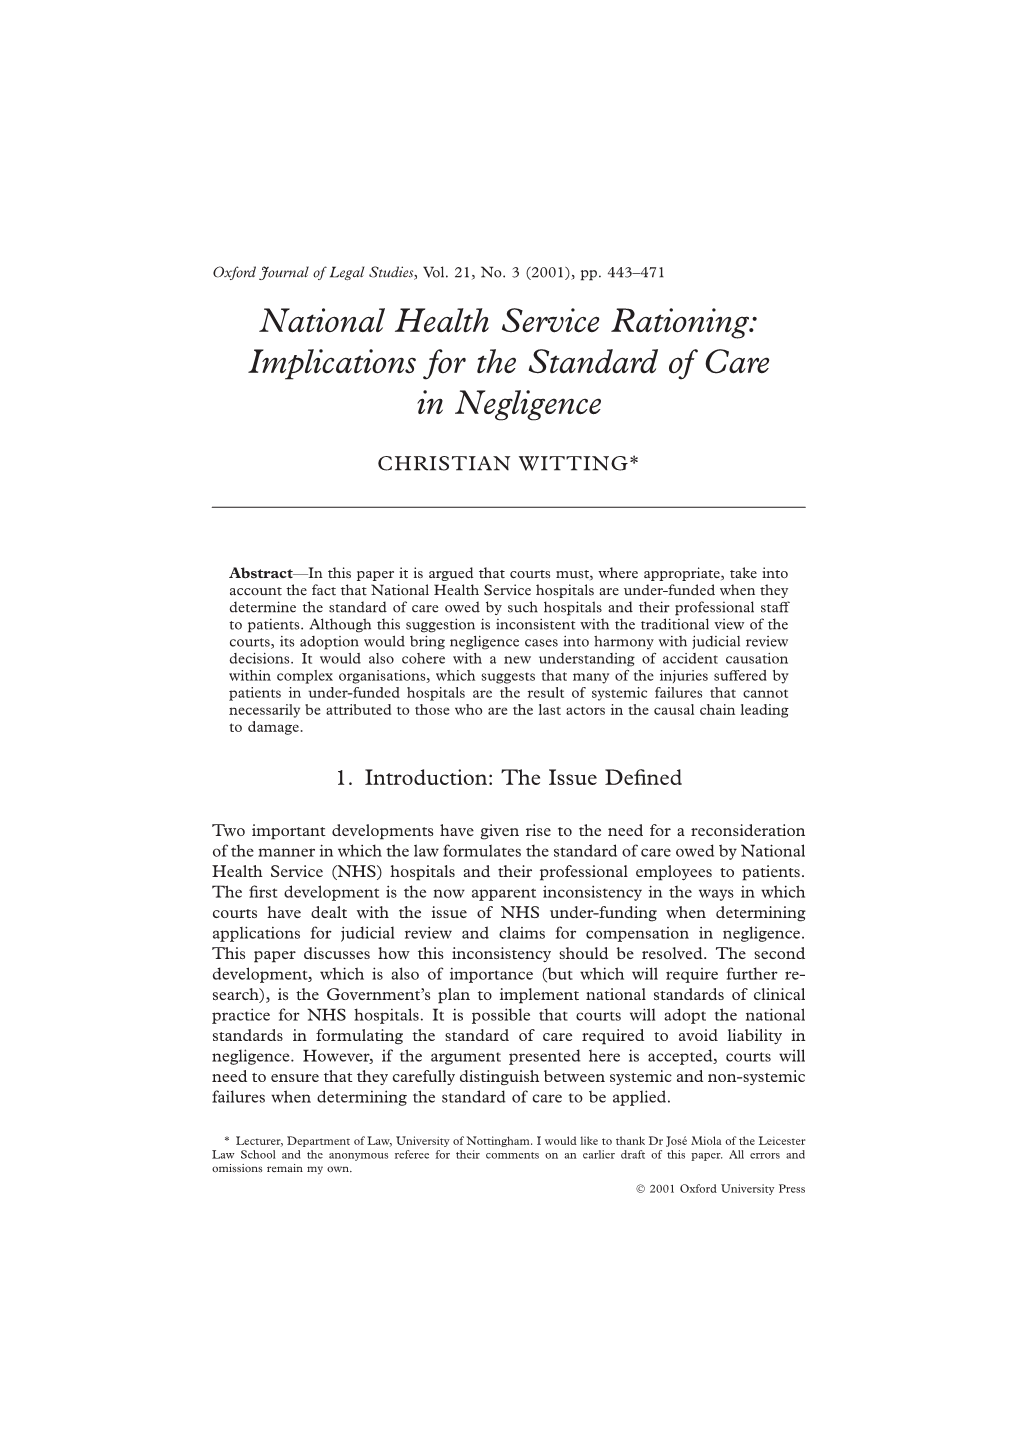 National Health Service Rationing: Implications for the Standard of Care in Negligence